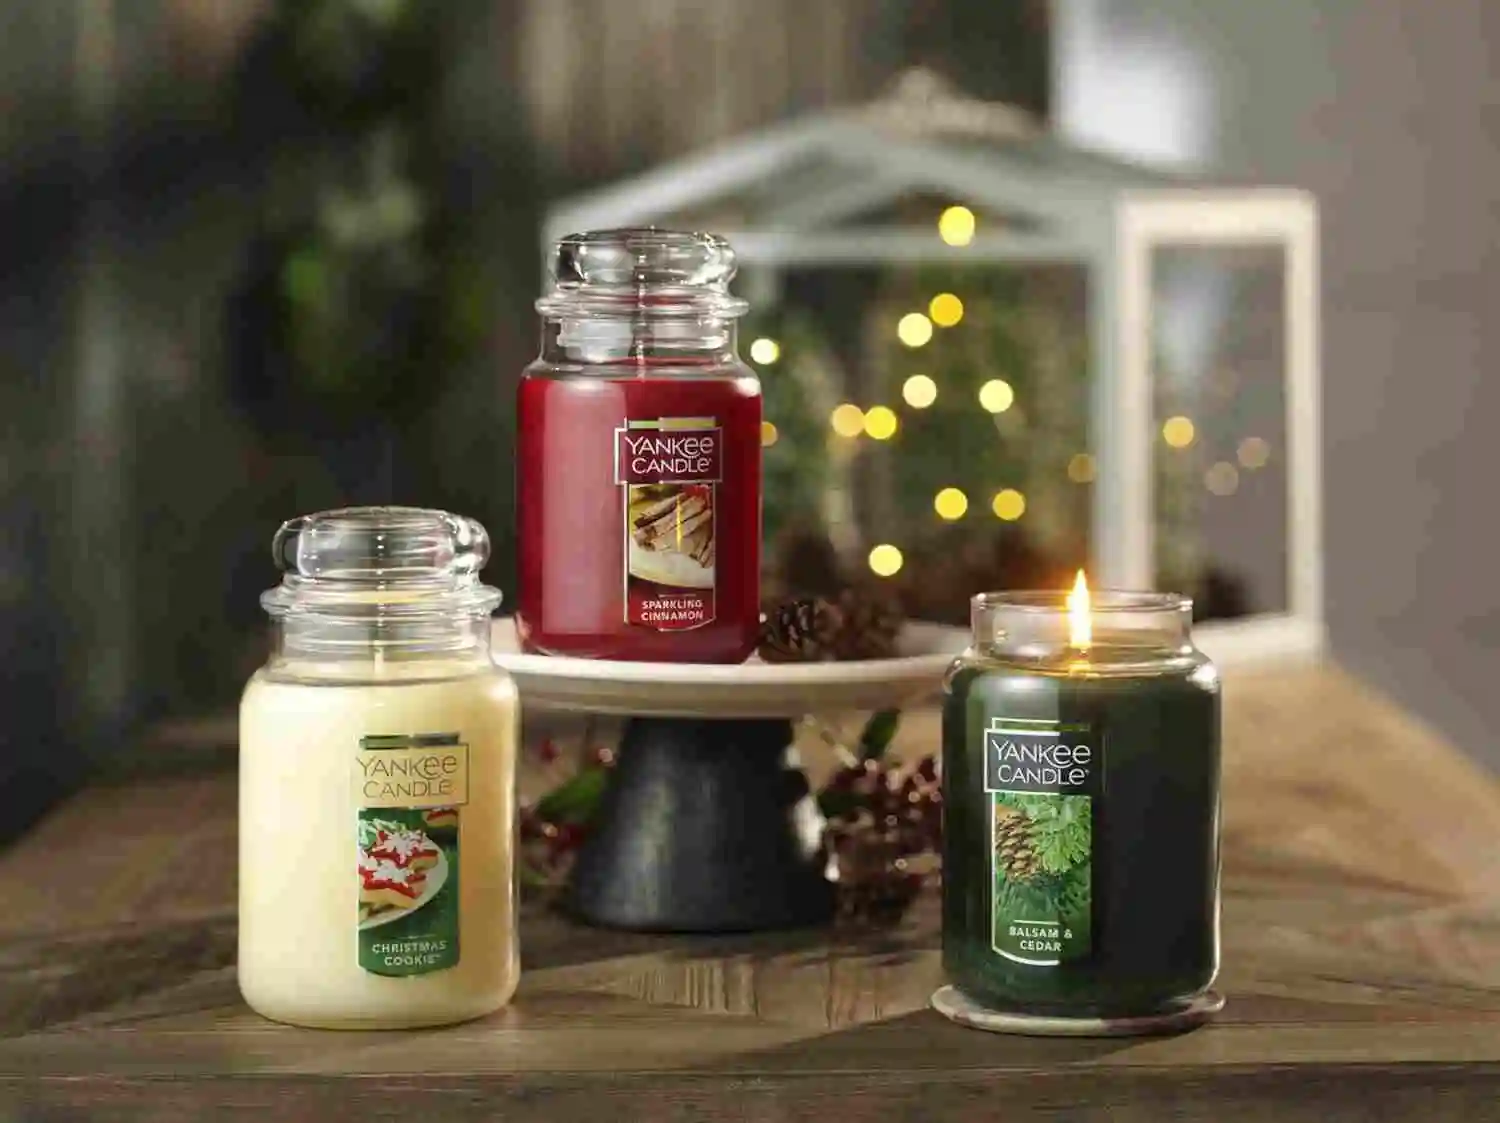  Yankee Candle Balsam & Cedar Scented, Classic 22oz Large  Tumbler 2-Wick Candle, Over 75 Hours of Burn Time, Christmas